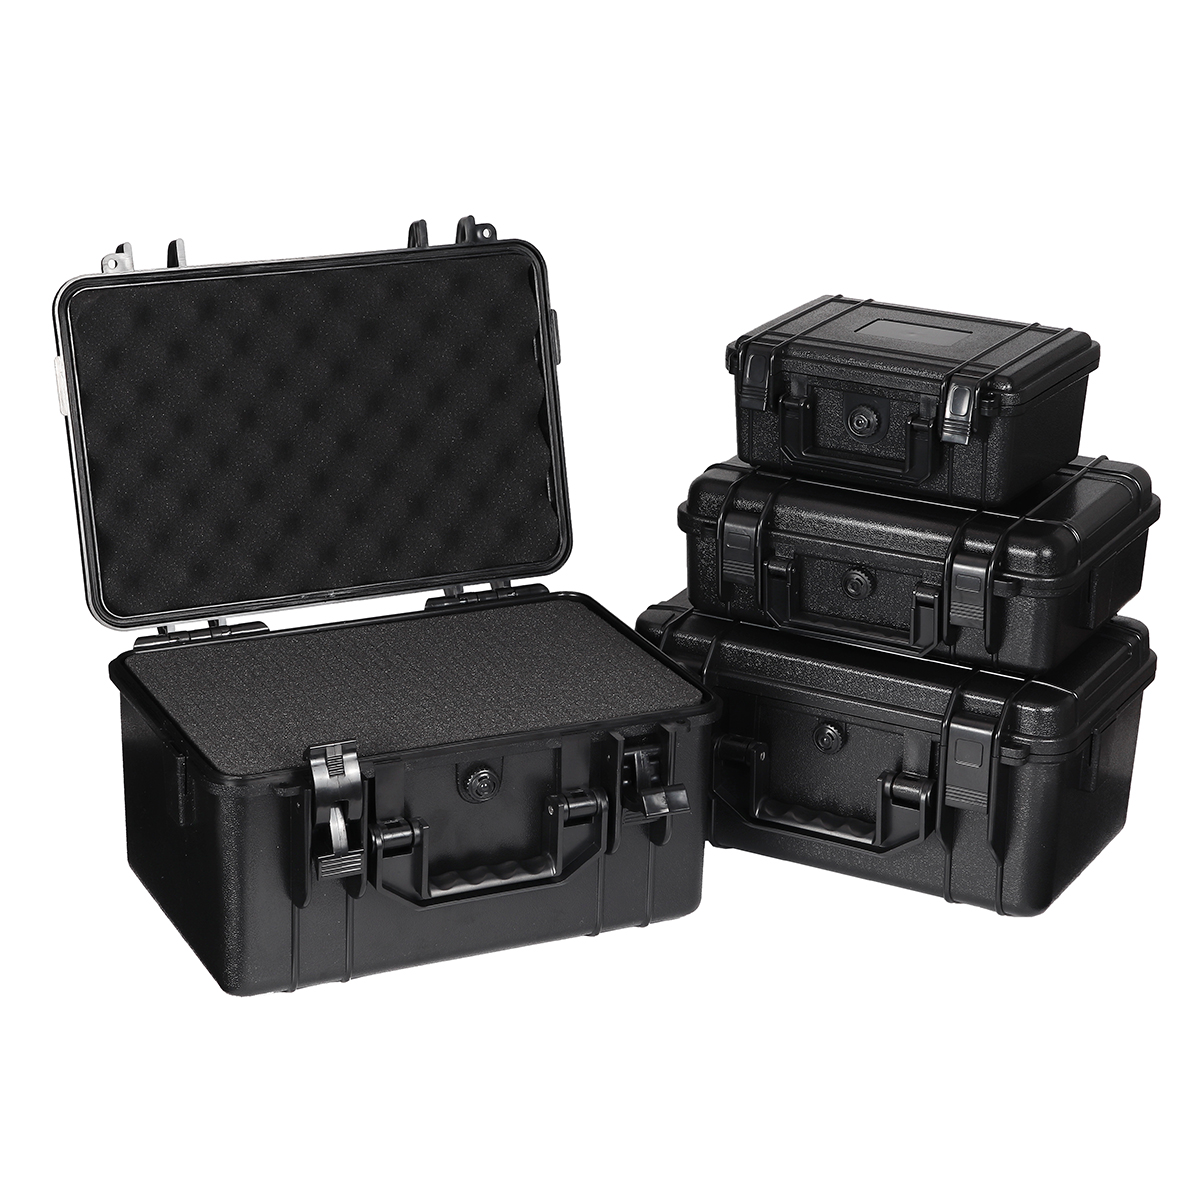 4-Sizes-ABS-Plastic-Sealed-Waterproof-Storage-Case-Foam-Impact--Resistant-Hiking-Portable-Tool-Box-D-1674189-11